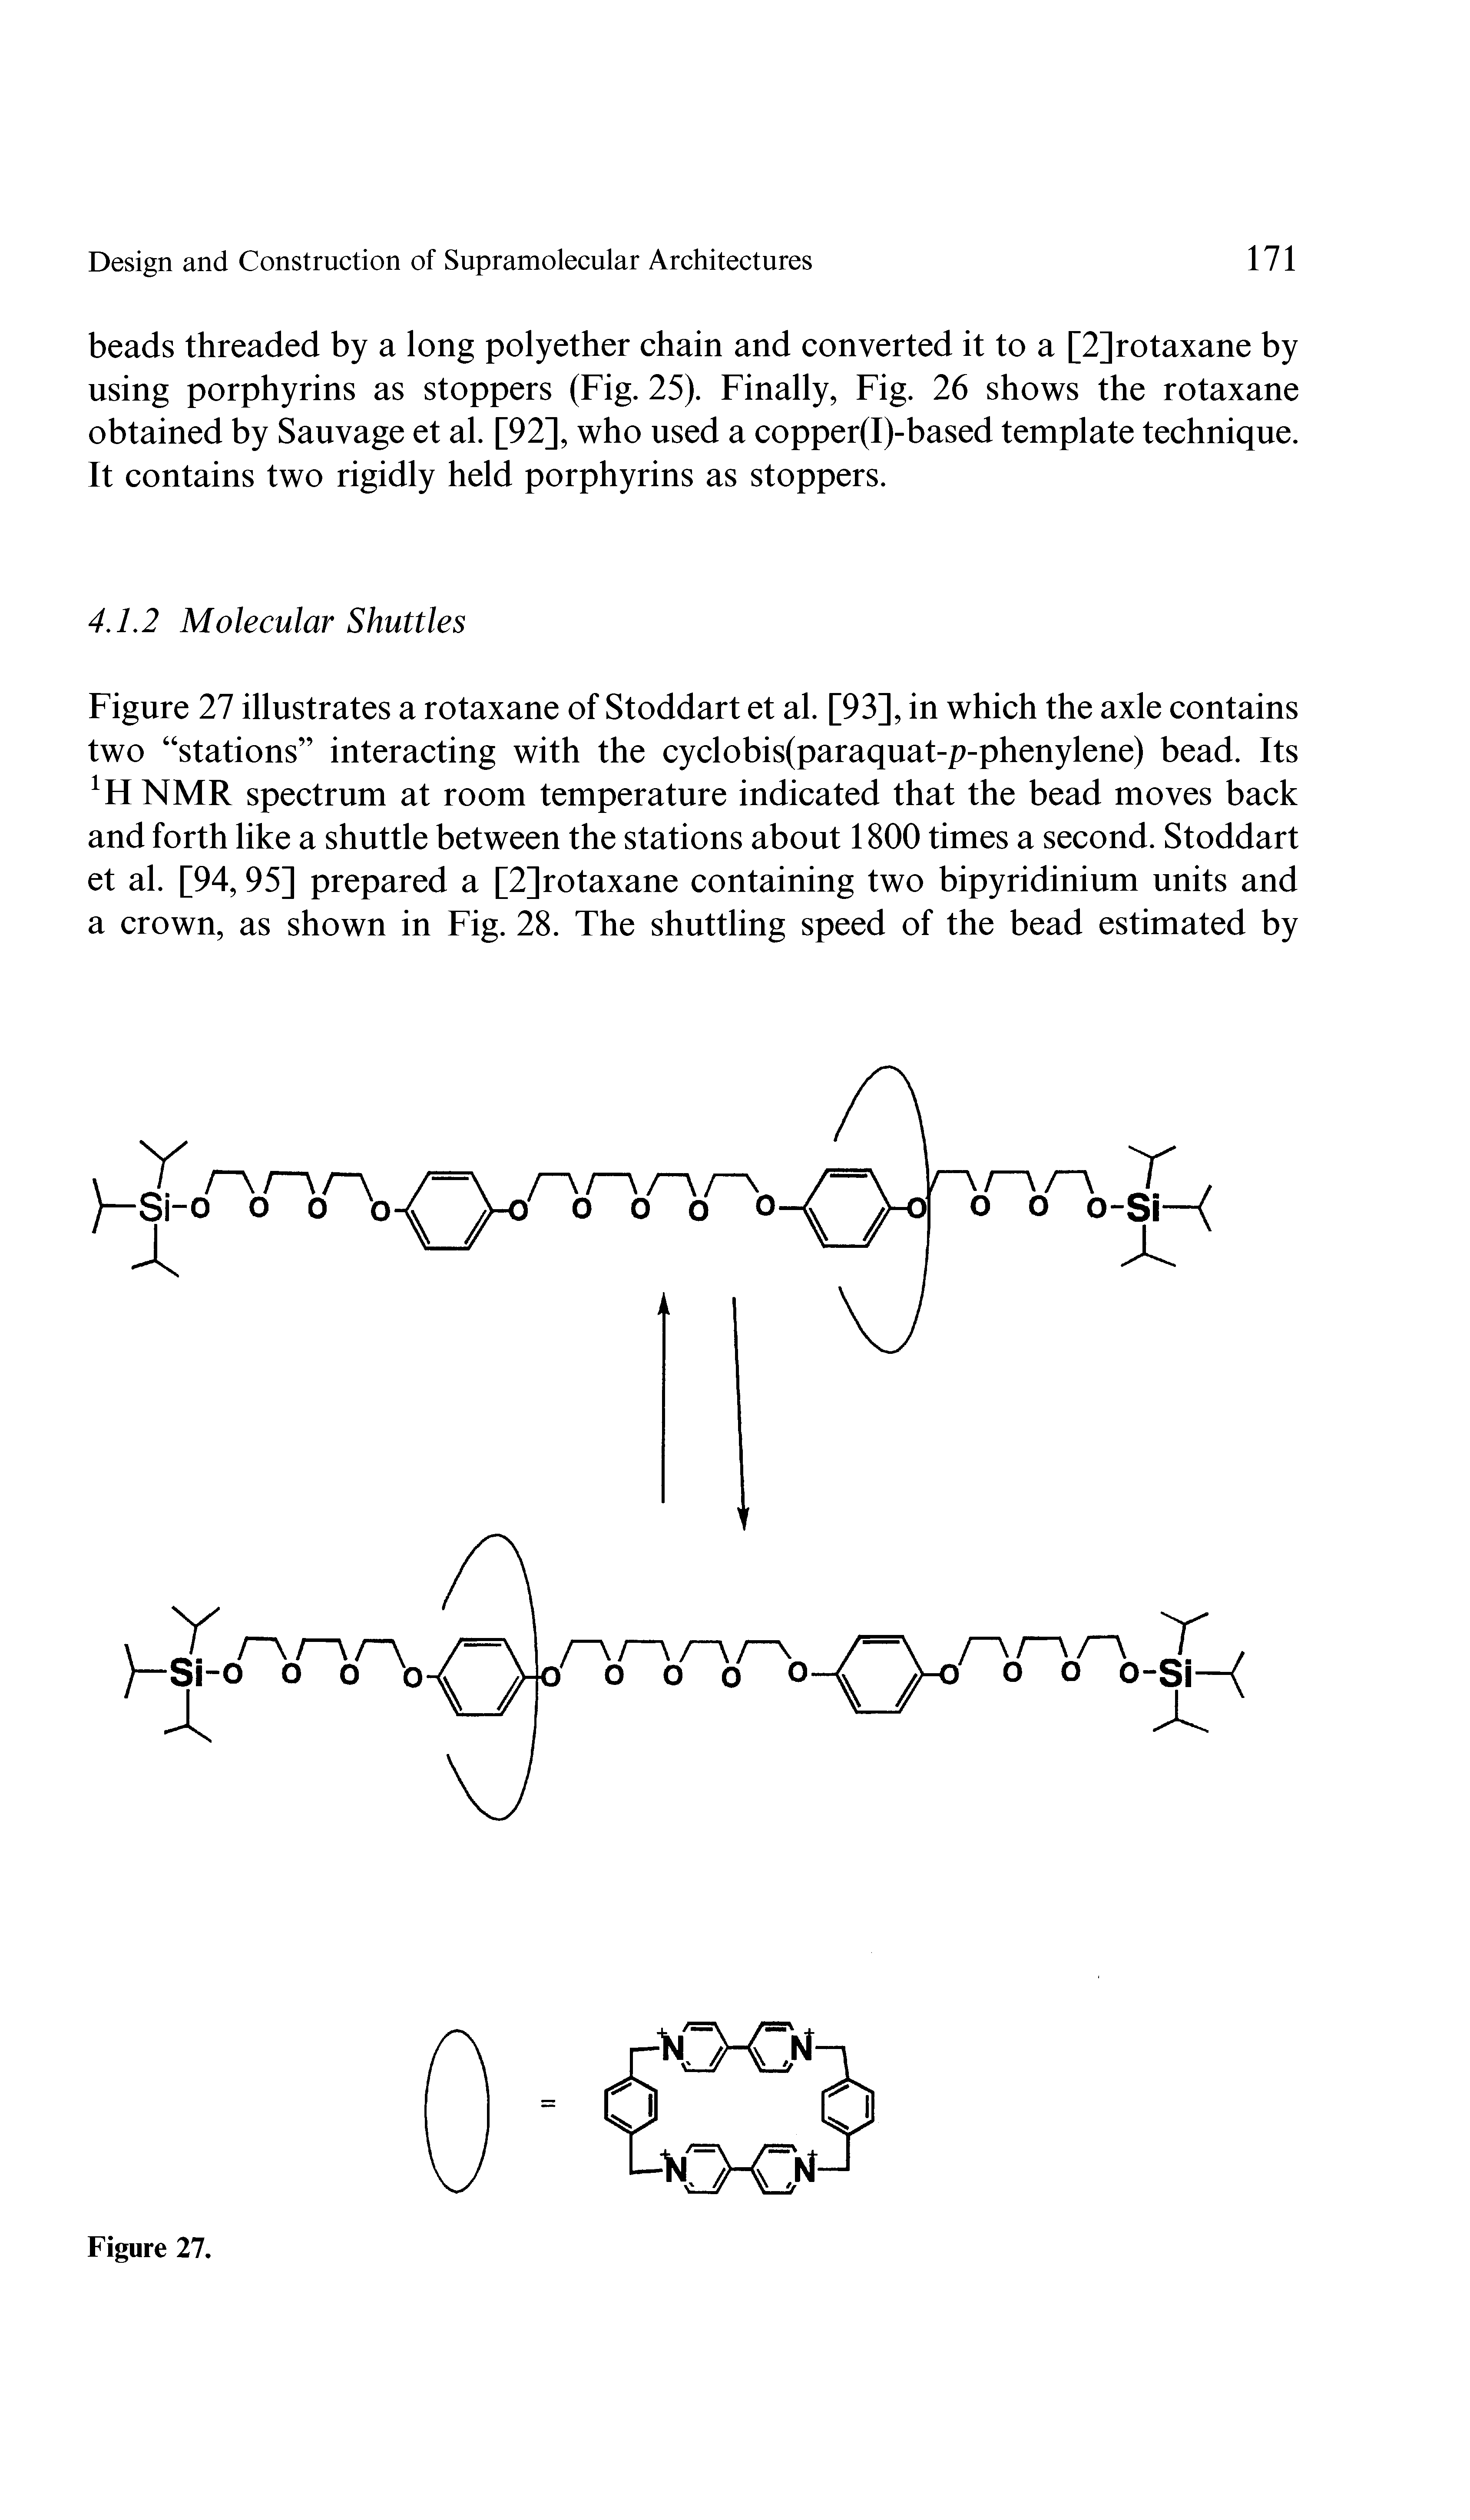 Figure 27 illustrates a rotaxane of Stoddart et al. [93], in which the axle contains two stations interacting with the cyclobis(paraquat-p-phenylene) bead. Its NMR spectrum at room temperature indicated that the bead moves back and forth like a shuttle between the stations about 1800 times a second. Stoddart et al. [94,95] prepared a [2]rotaxane containing two bipyridinium units and a crown, as shown in Fig. 28. The shuttling speed of the bead estimated by...